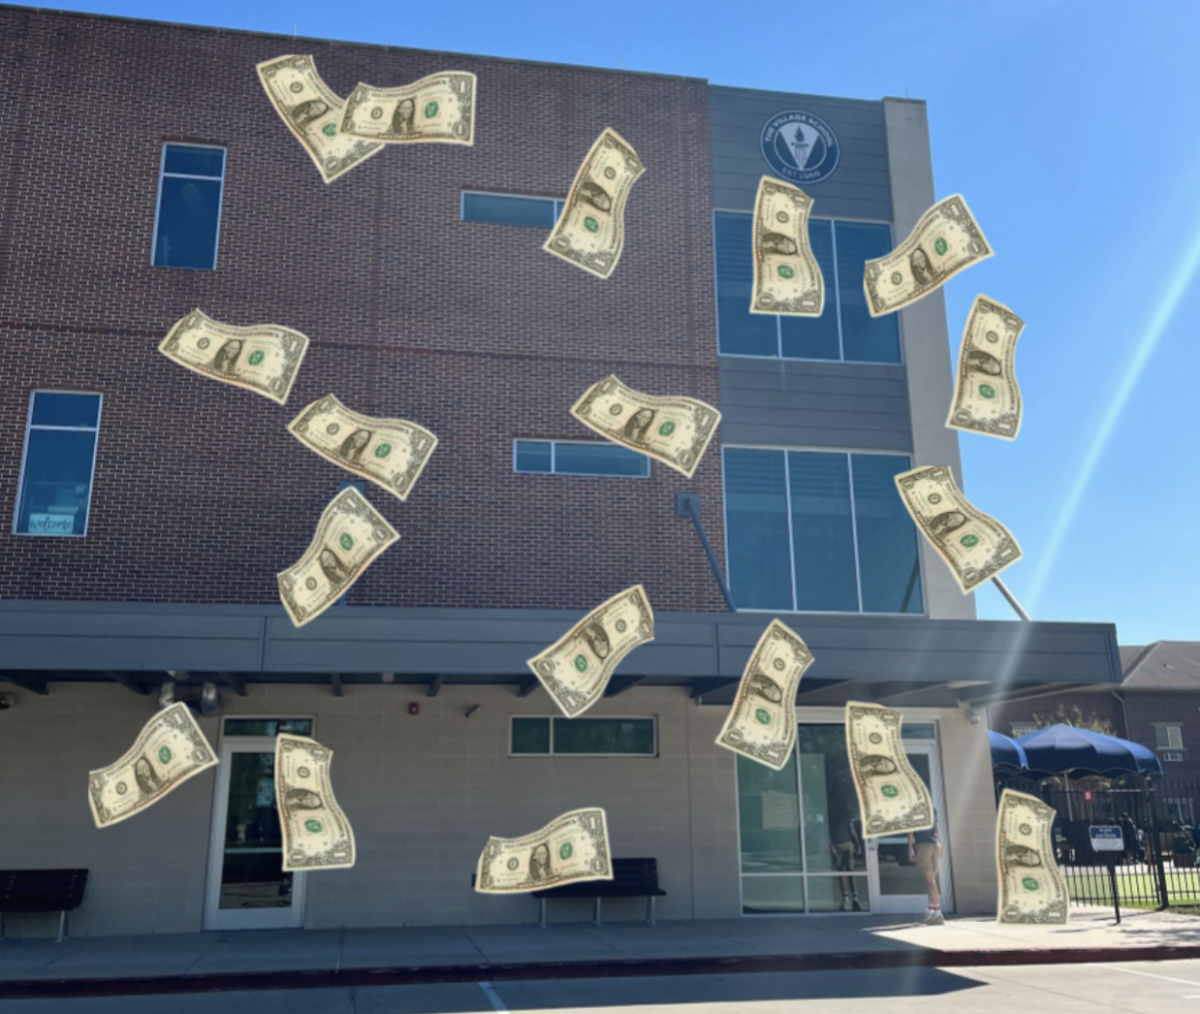 Photo of The Village High School main building edited to have dollar bills falling from the sky, created by George Masters.